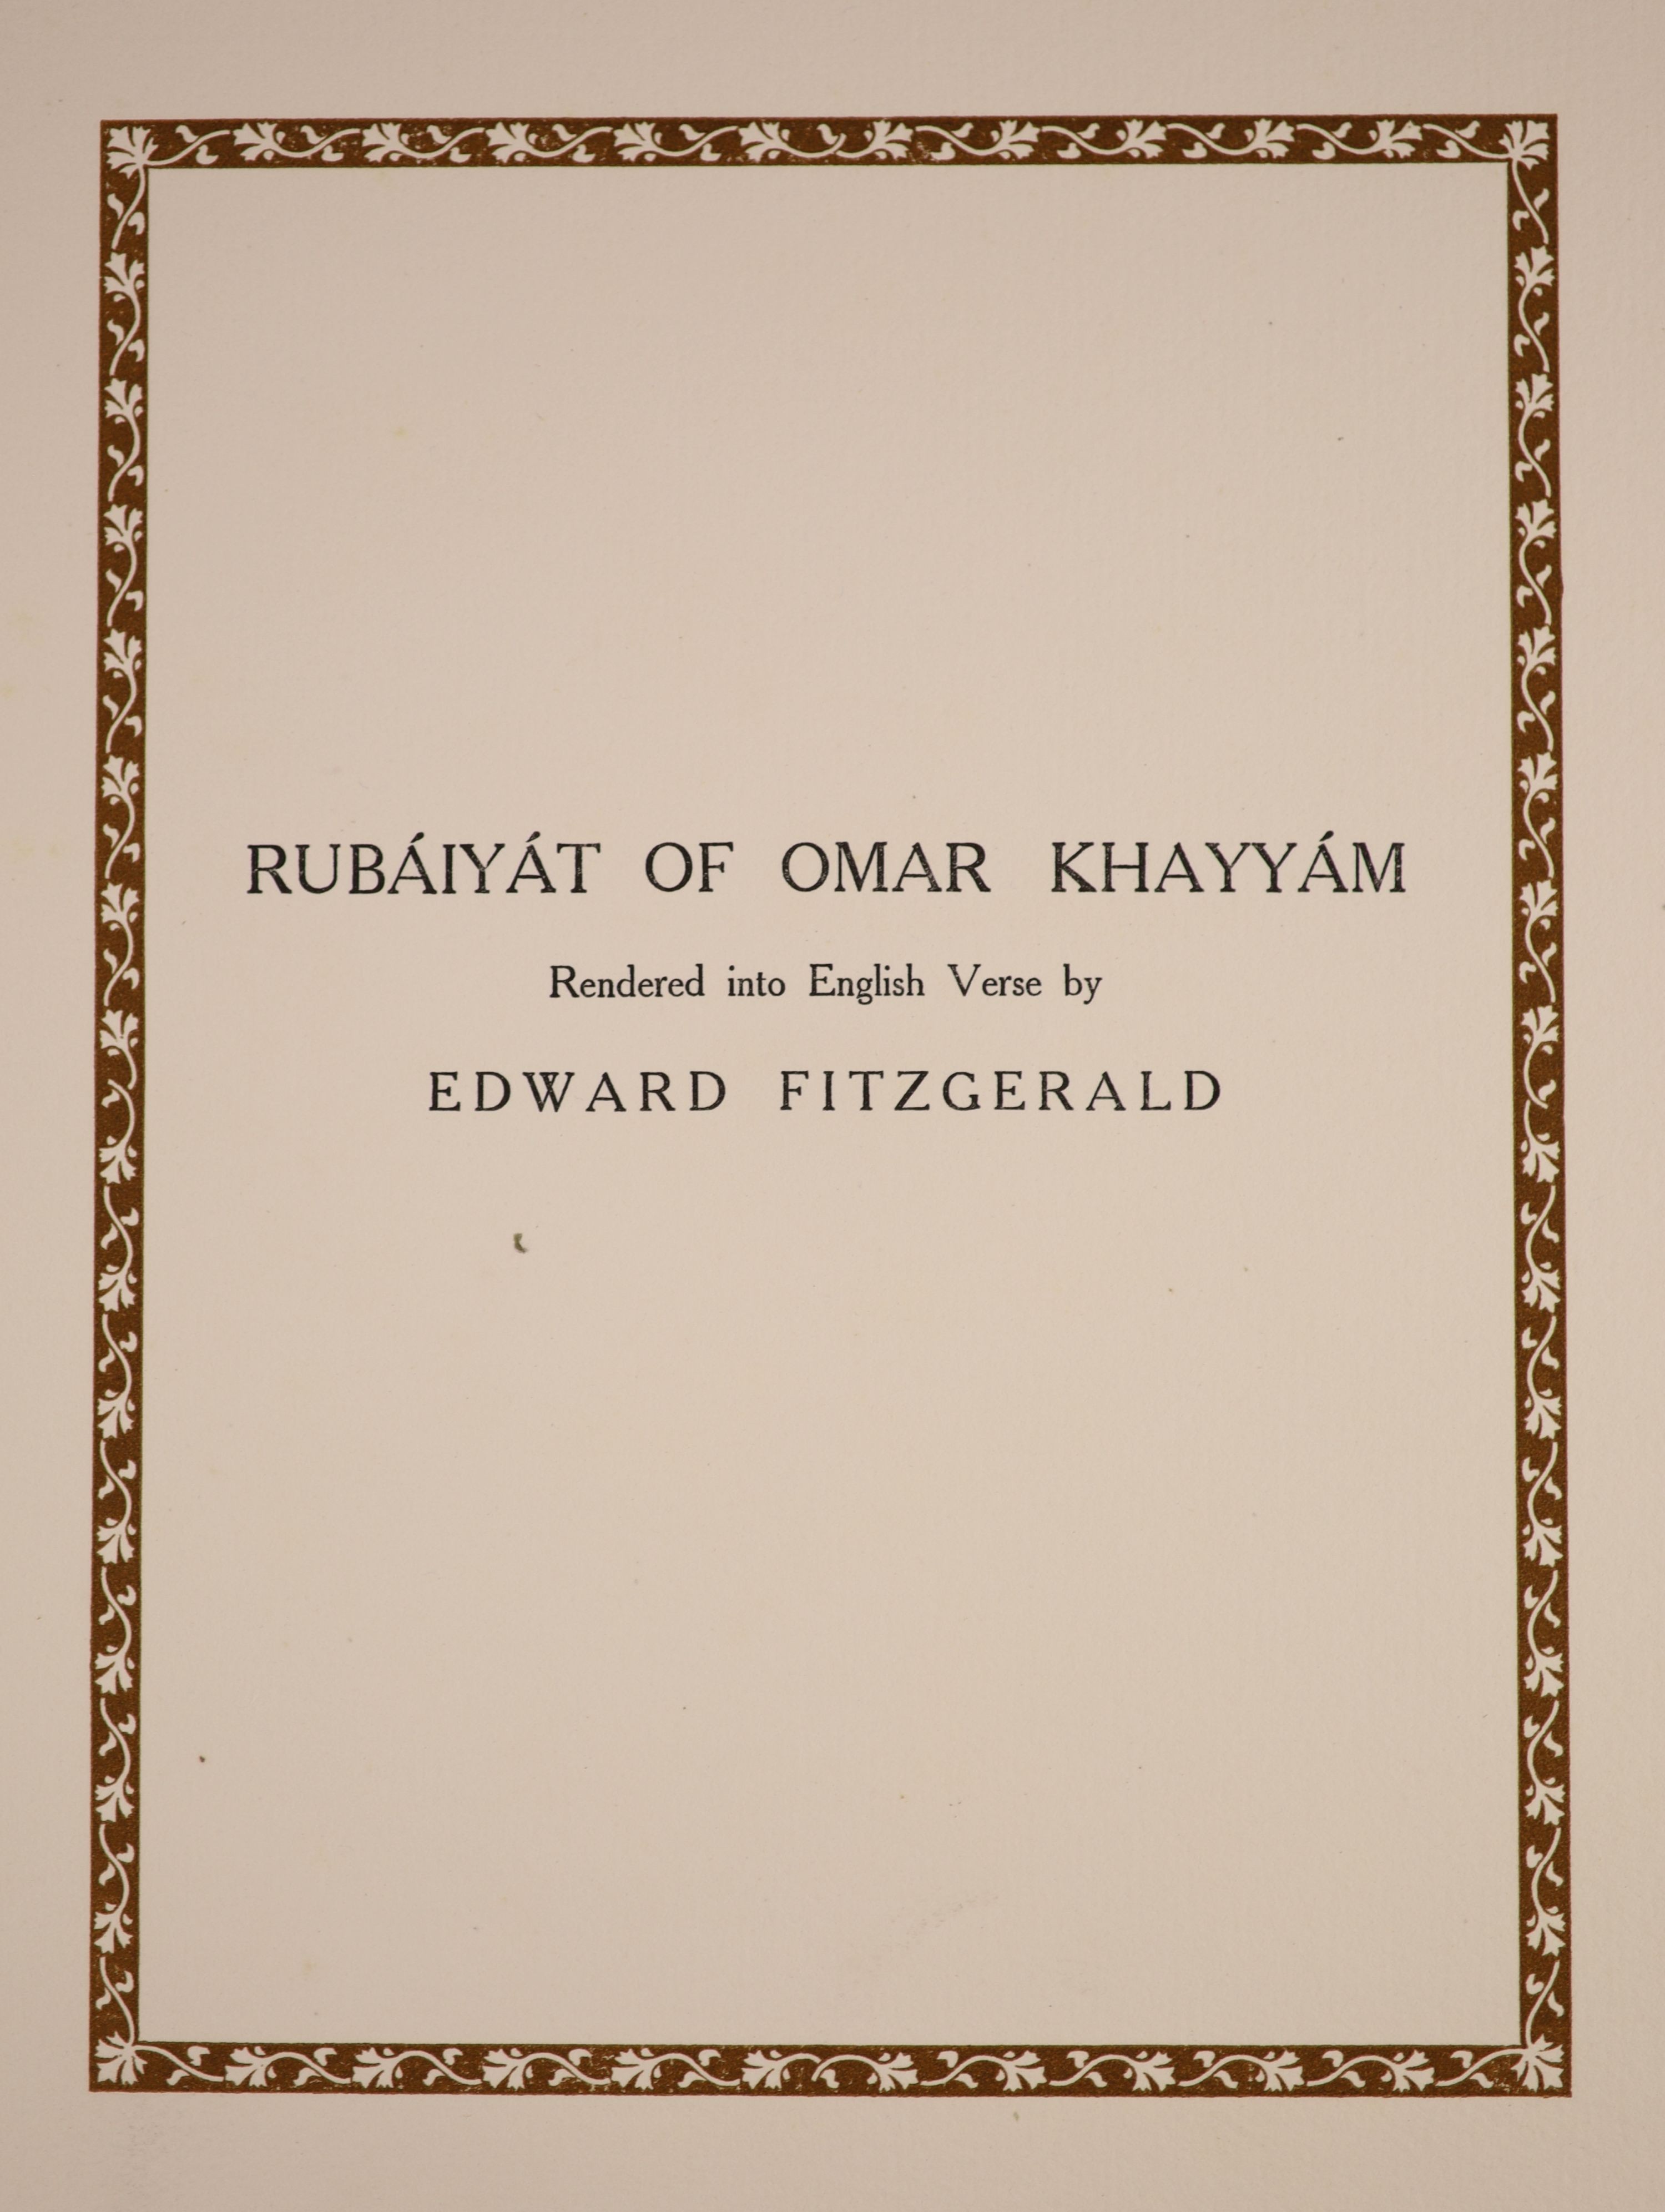 Omar Khayyam - The Rubaiyat, illustrated by Edmund Dulac, translated by Edward Fitzgerald, number 129 of 750, signed by the artist, original vellum, with silk ties and 20 tipped-in colour plates, Hodder and Stoughton, Lo